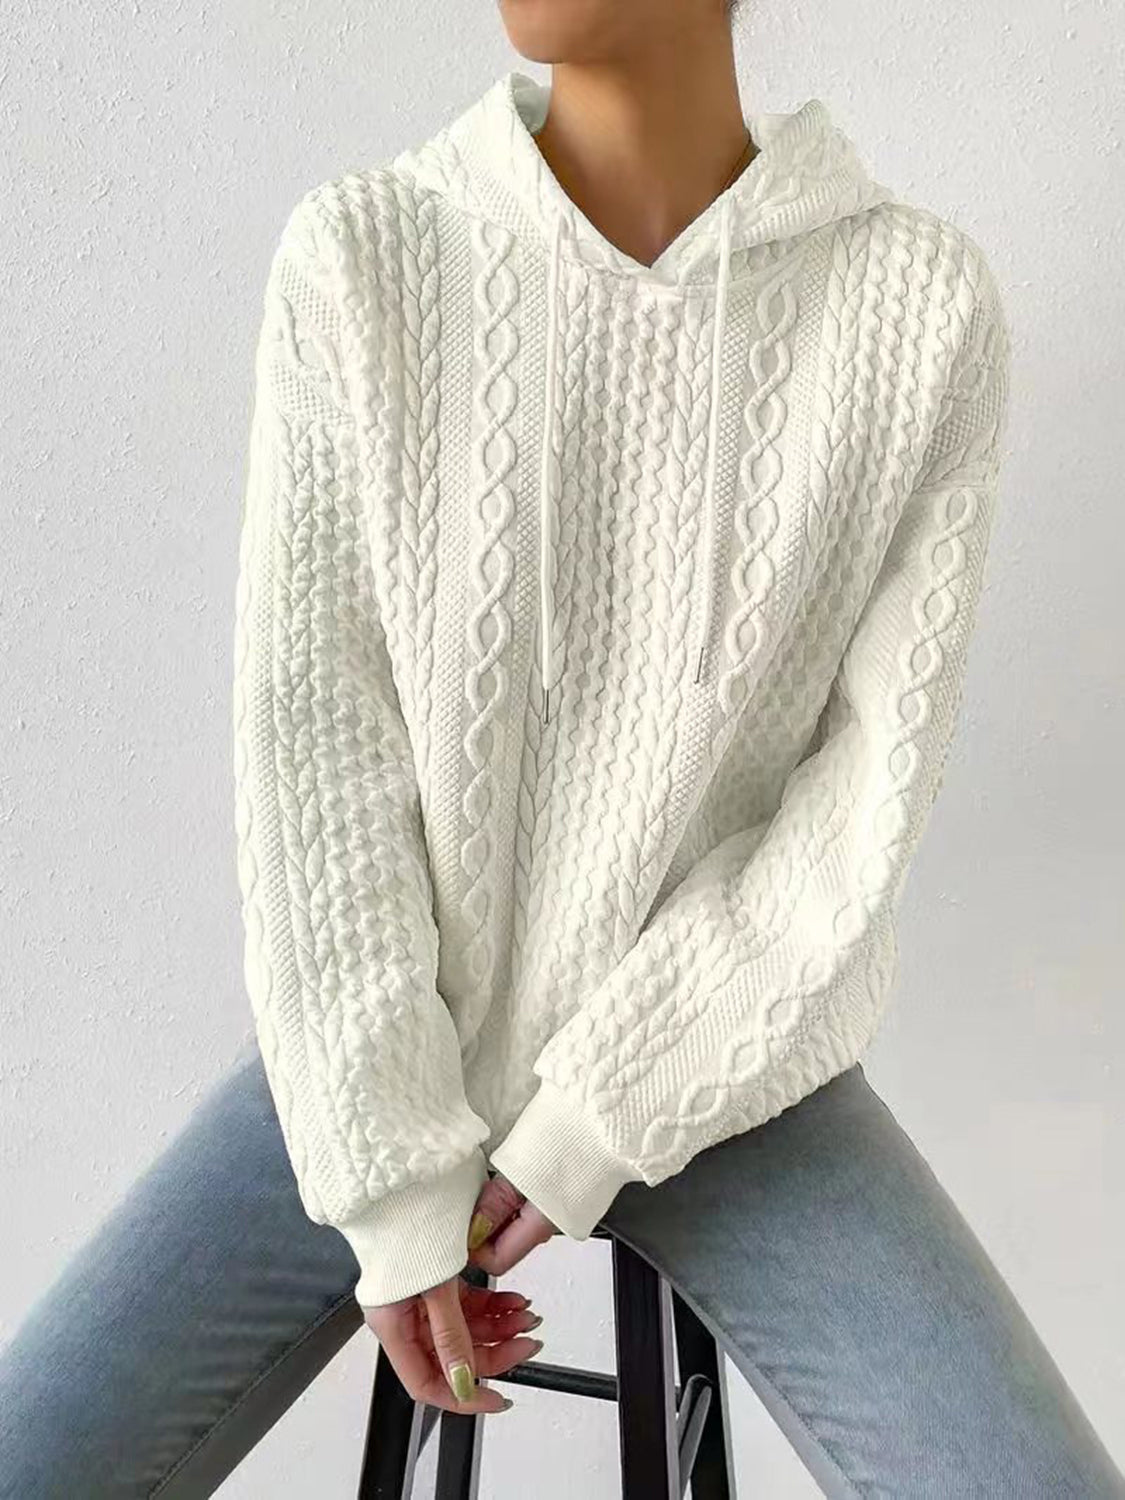 Textured Drawstring Long Sleeve Hoodie - Beige / 5XL - Women’s Clothing & Accessories - Shirts & Tops - 27 - 2024